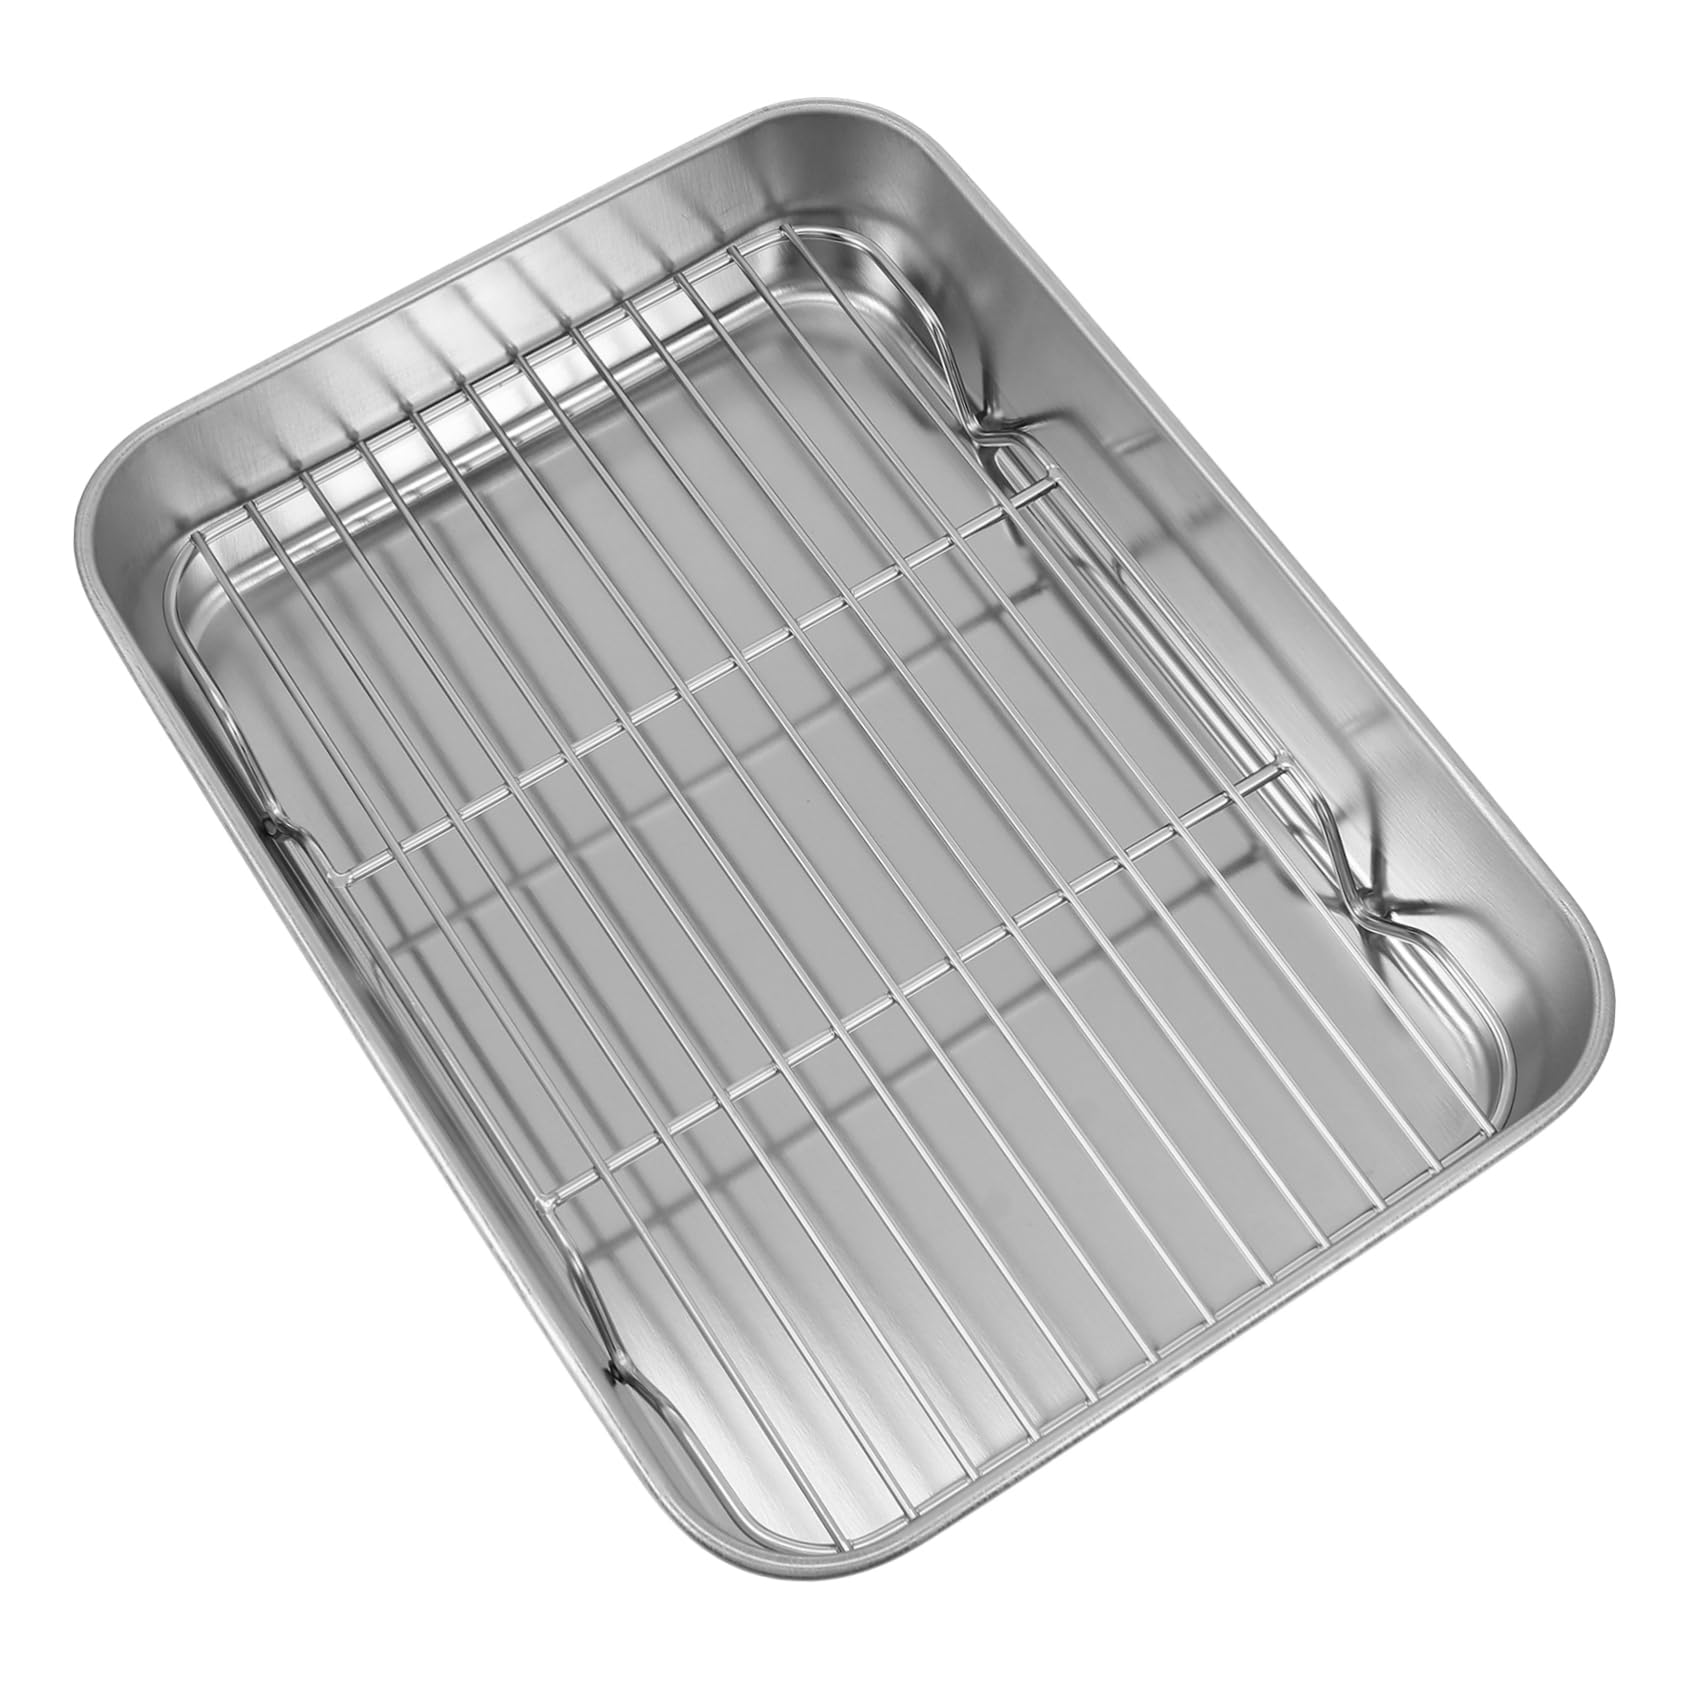 BESTOYARD 1 Set Stainless Steel Bakeware Cake Plates Disposable Pizza Ovens Cupcakes Mini Grill Heavy Duty Aluminum Foil Oven Roaster Pan with Lid Mini Oven Pans Japanese-style Grill Plate